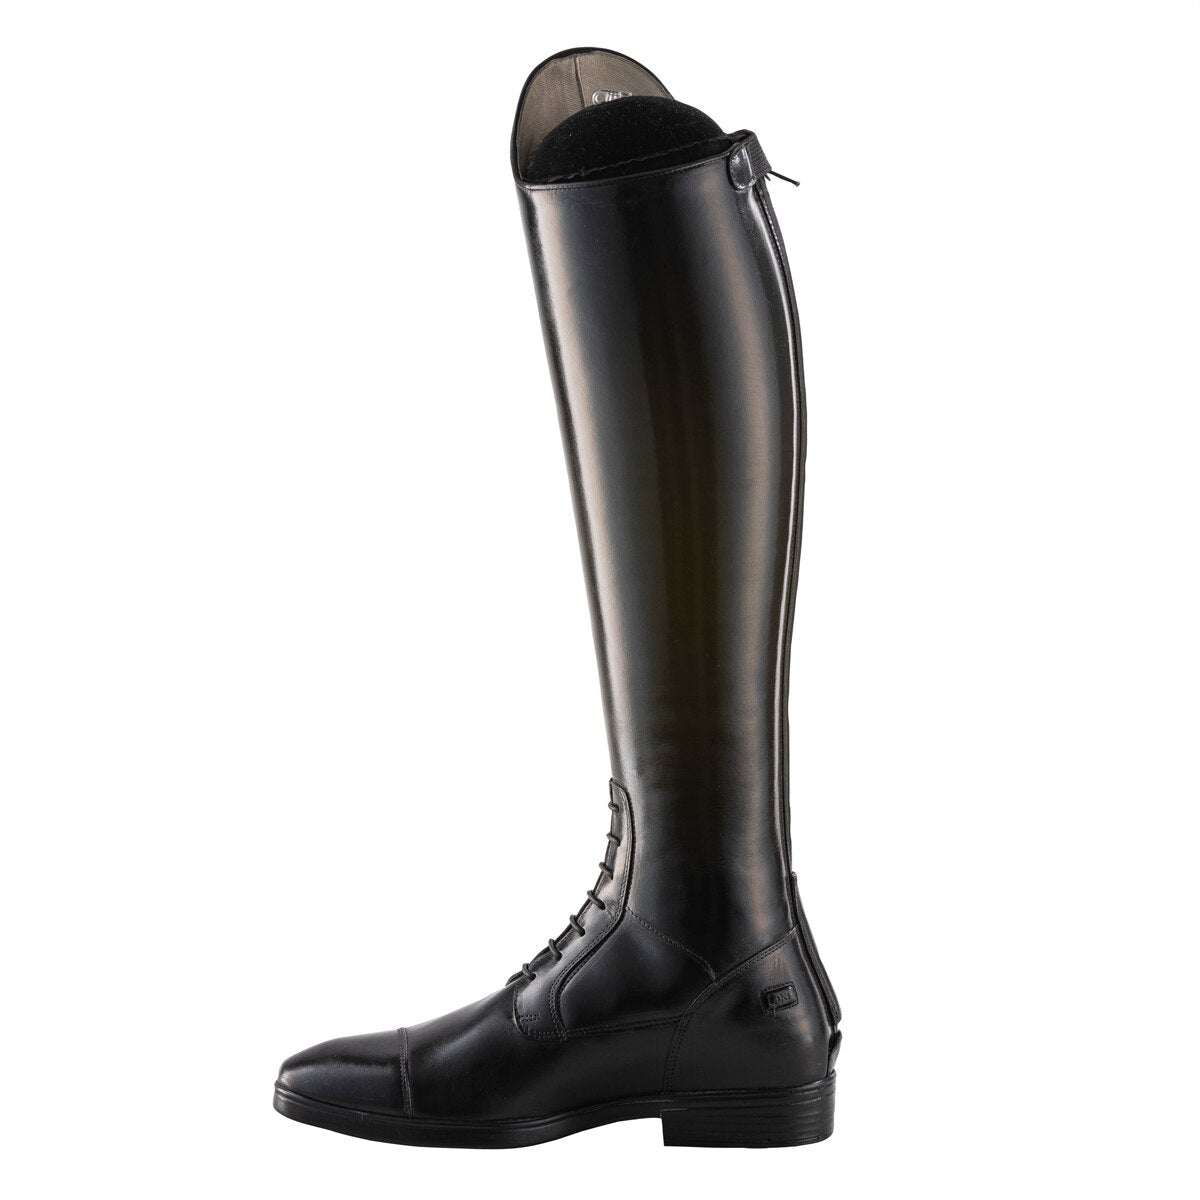 TriColore by DeNiro Amabile Field Boot Smooth Leather, Corta (Short) Height